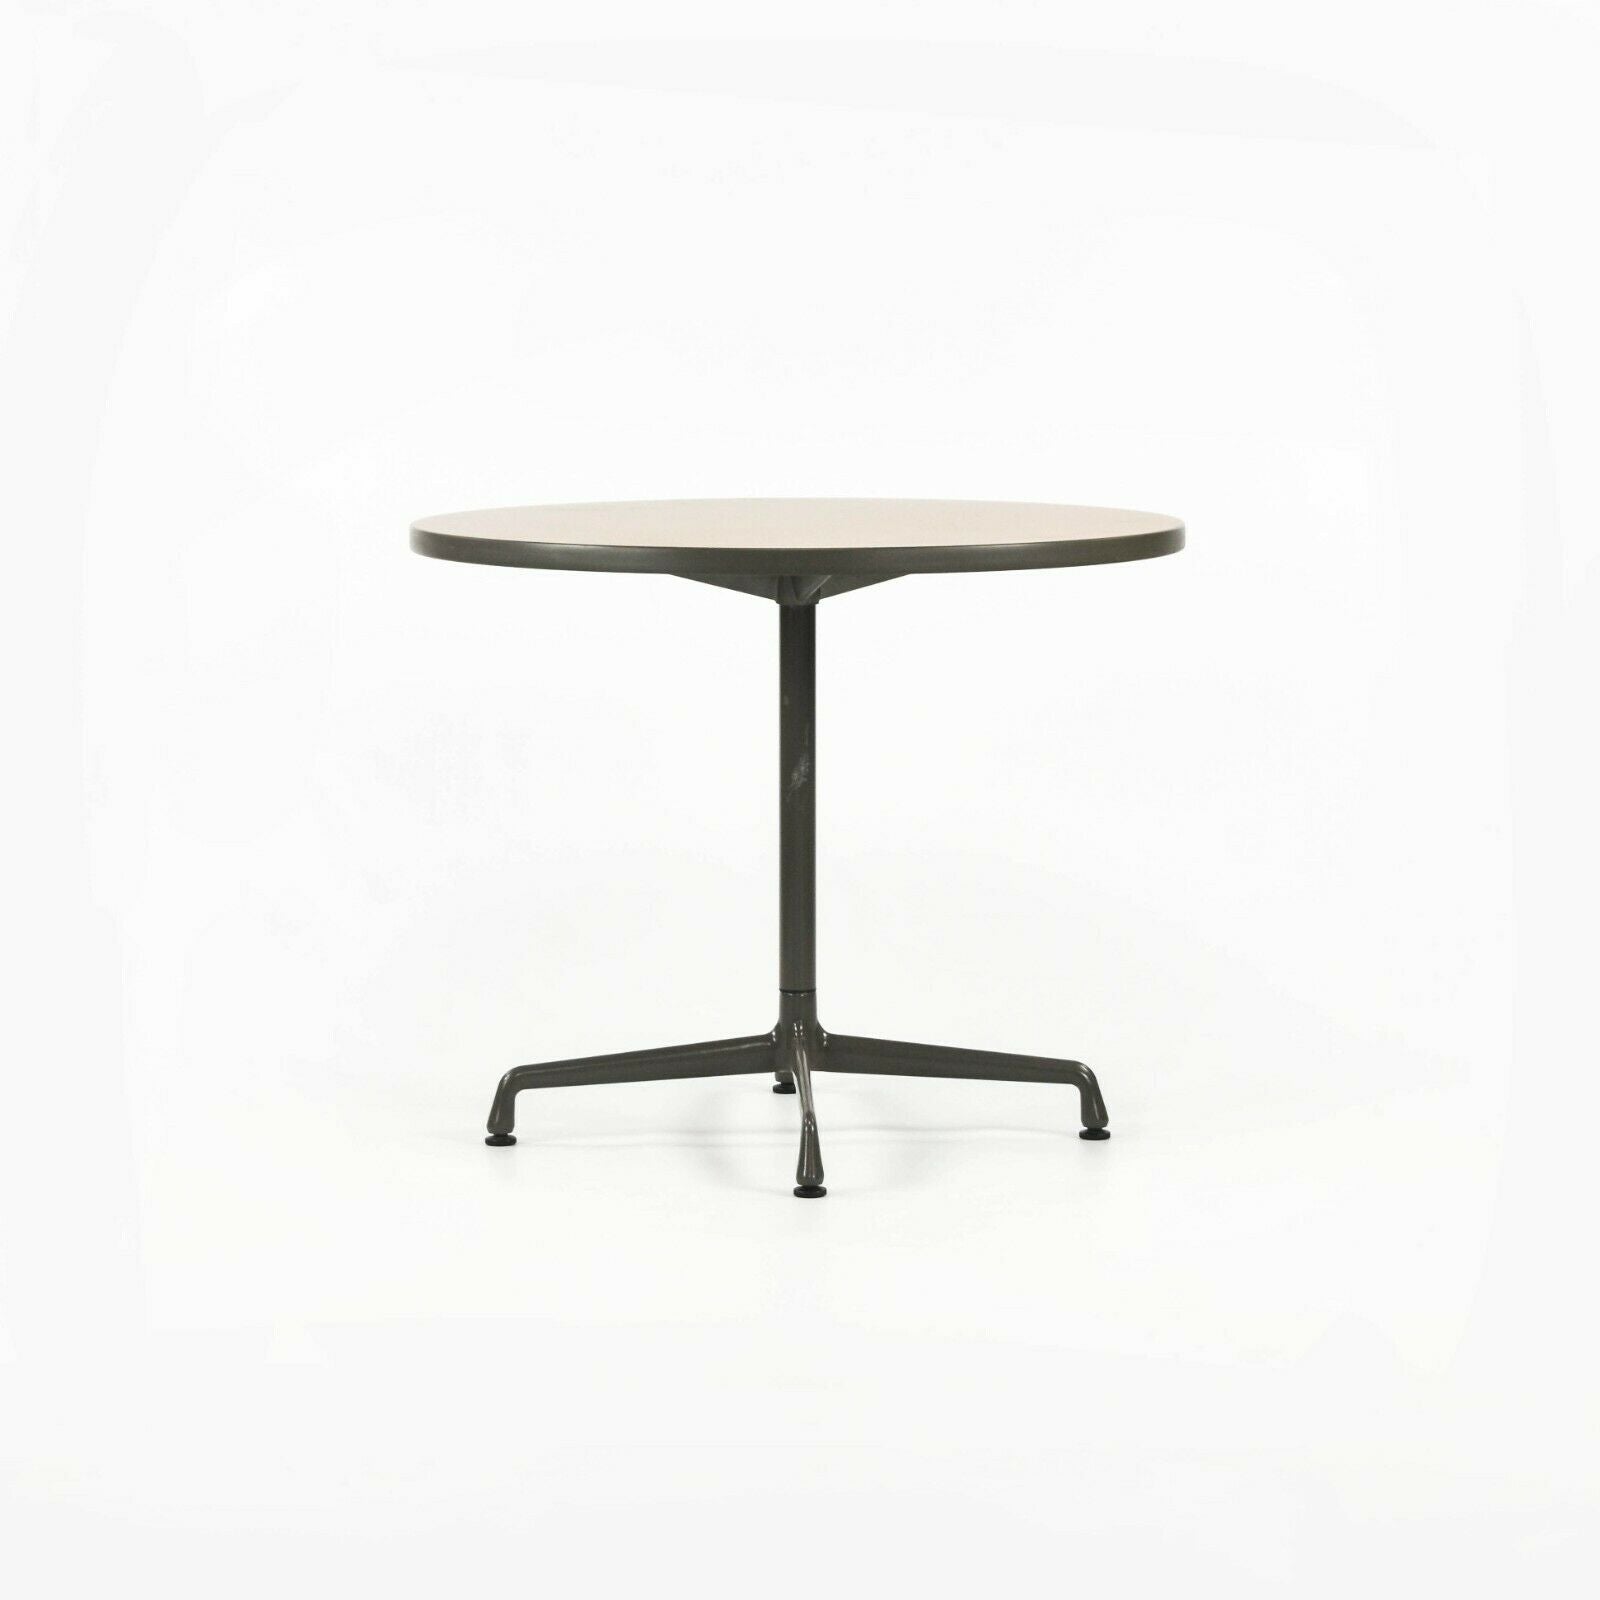 SOLD 1990s Herman Miller Eames Aluminum Group Small Round Dining Cafe Table Laminate